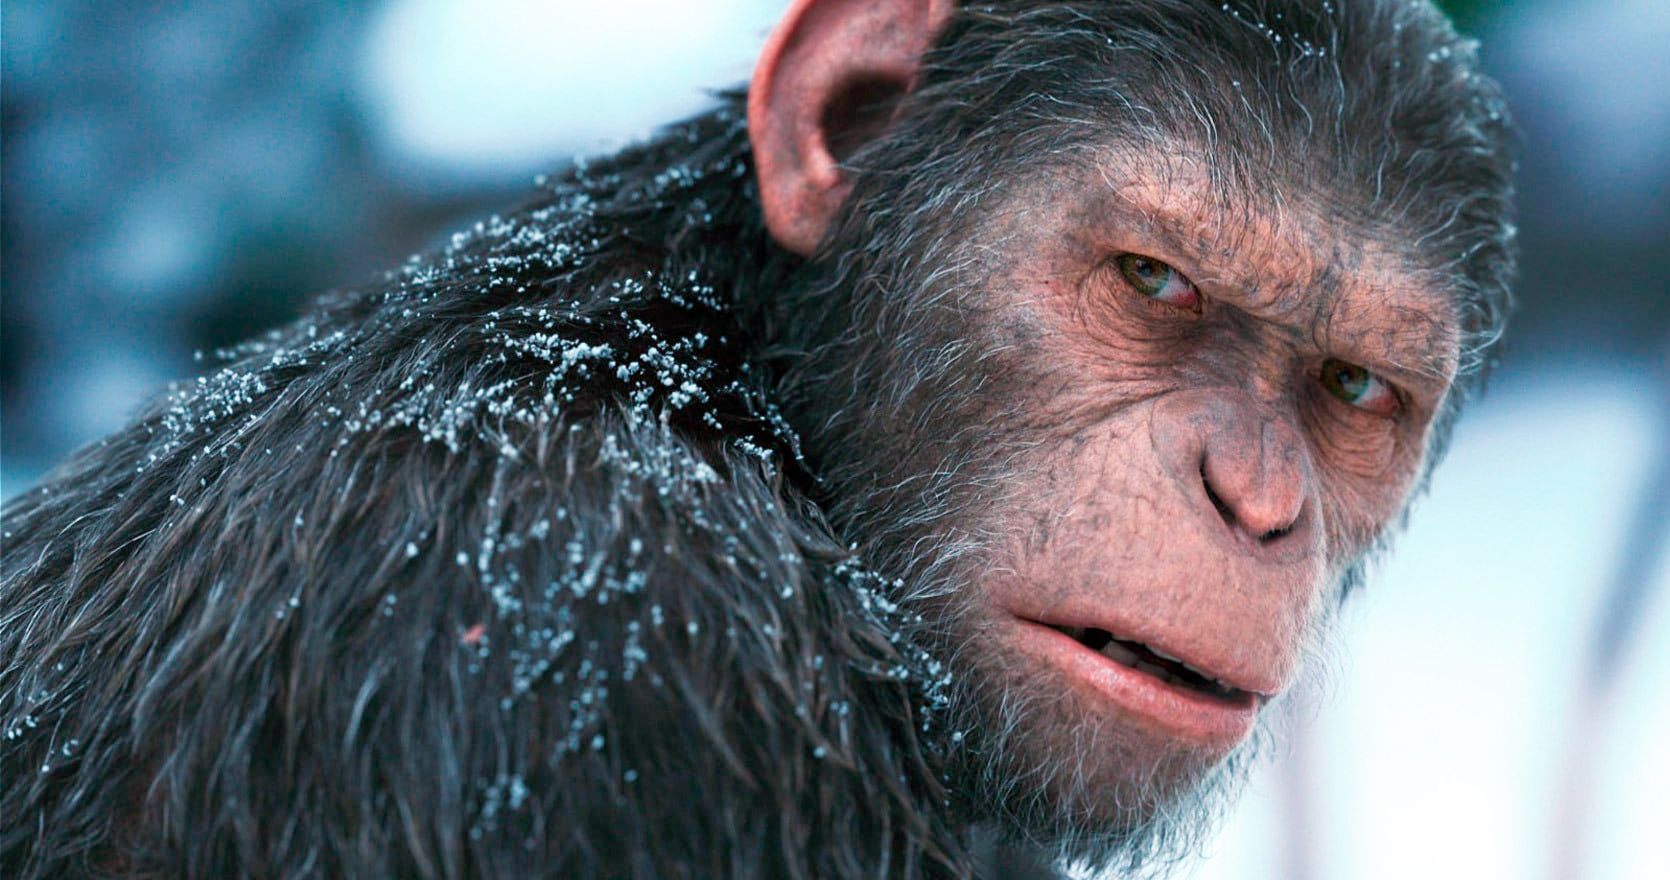 New Planet of the Apes Movie Happening at Disney with Maze Runner Director